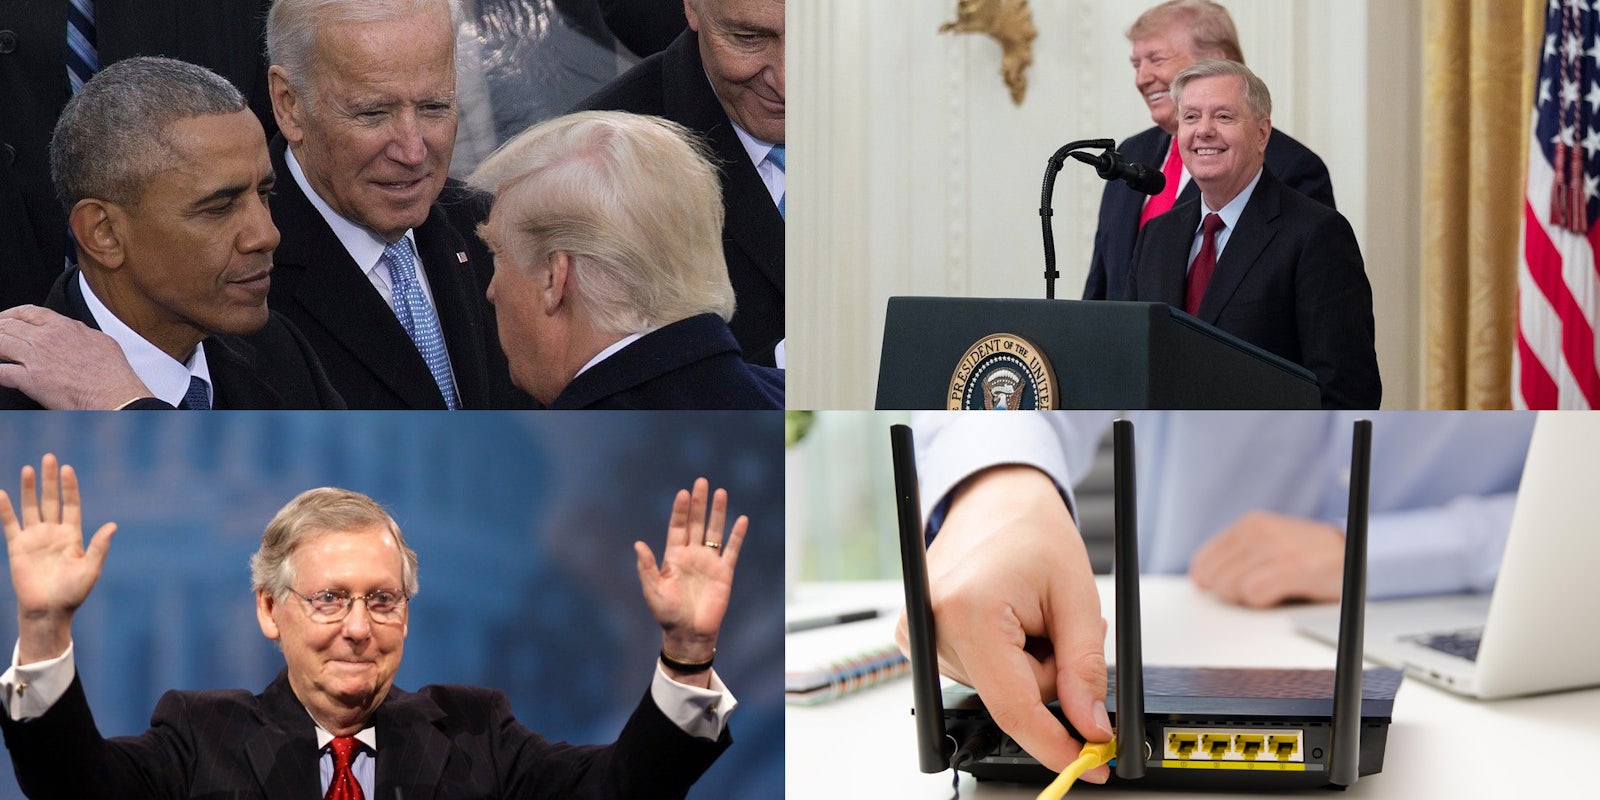 A collage of images showing Donald Trump, Joe Biden, Barack Obama, Lindsey Graham, Mitch McConnell and someone plugging in a router.